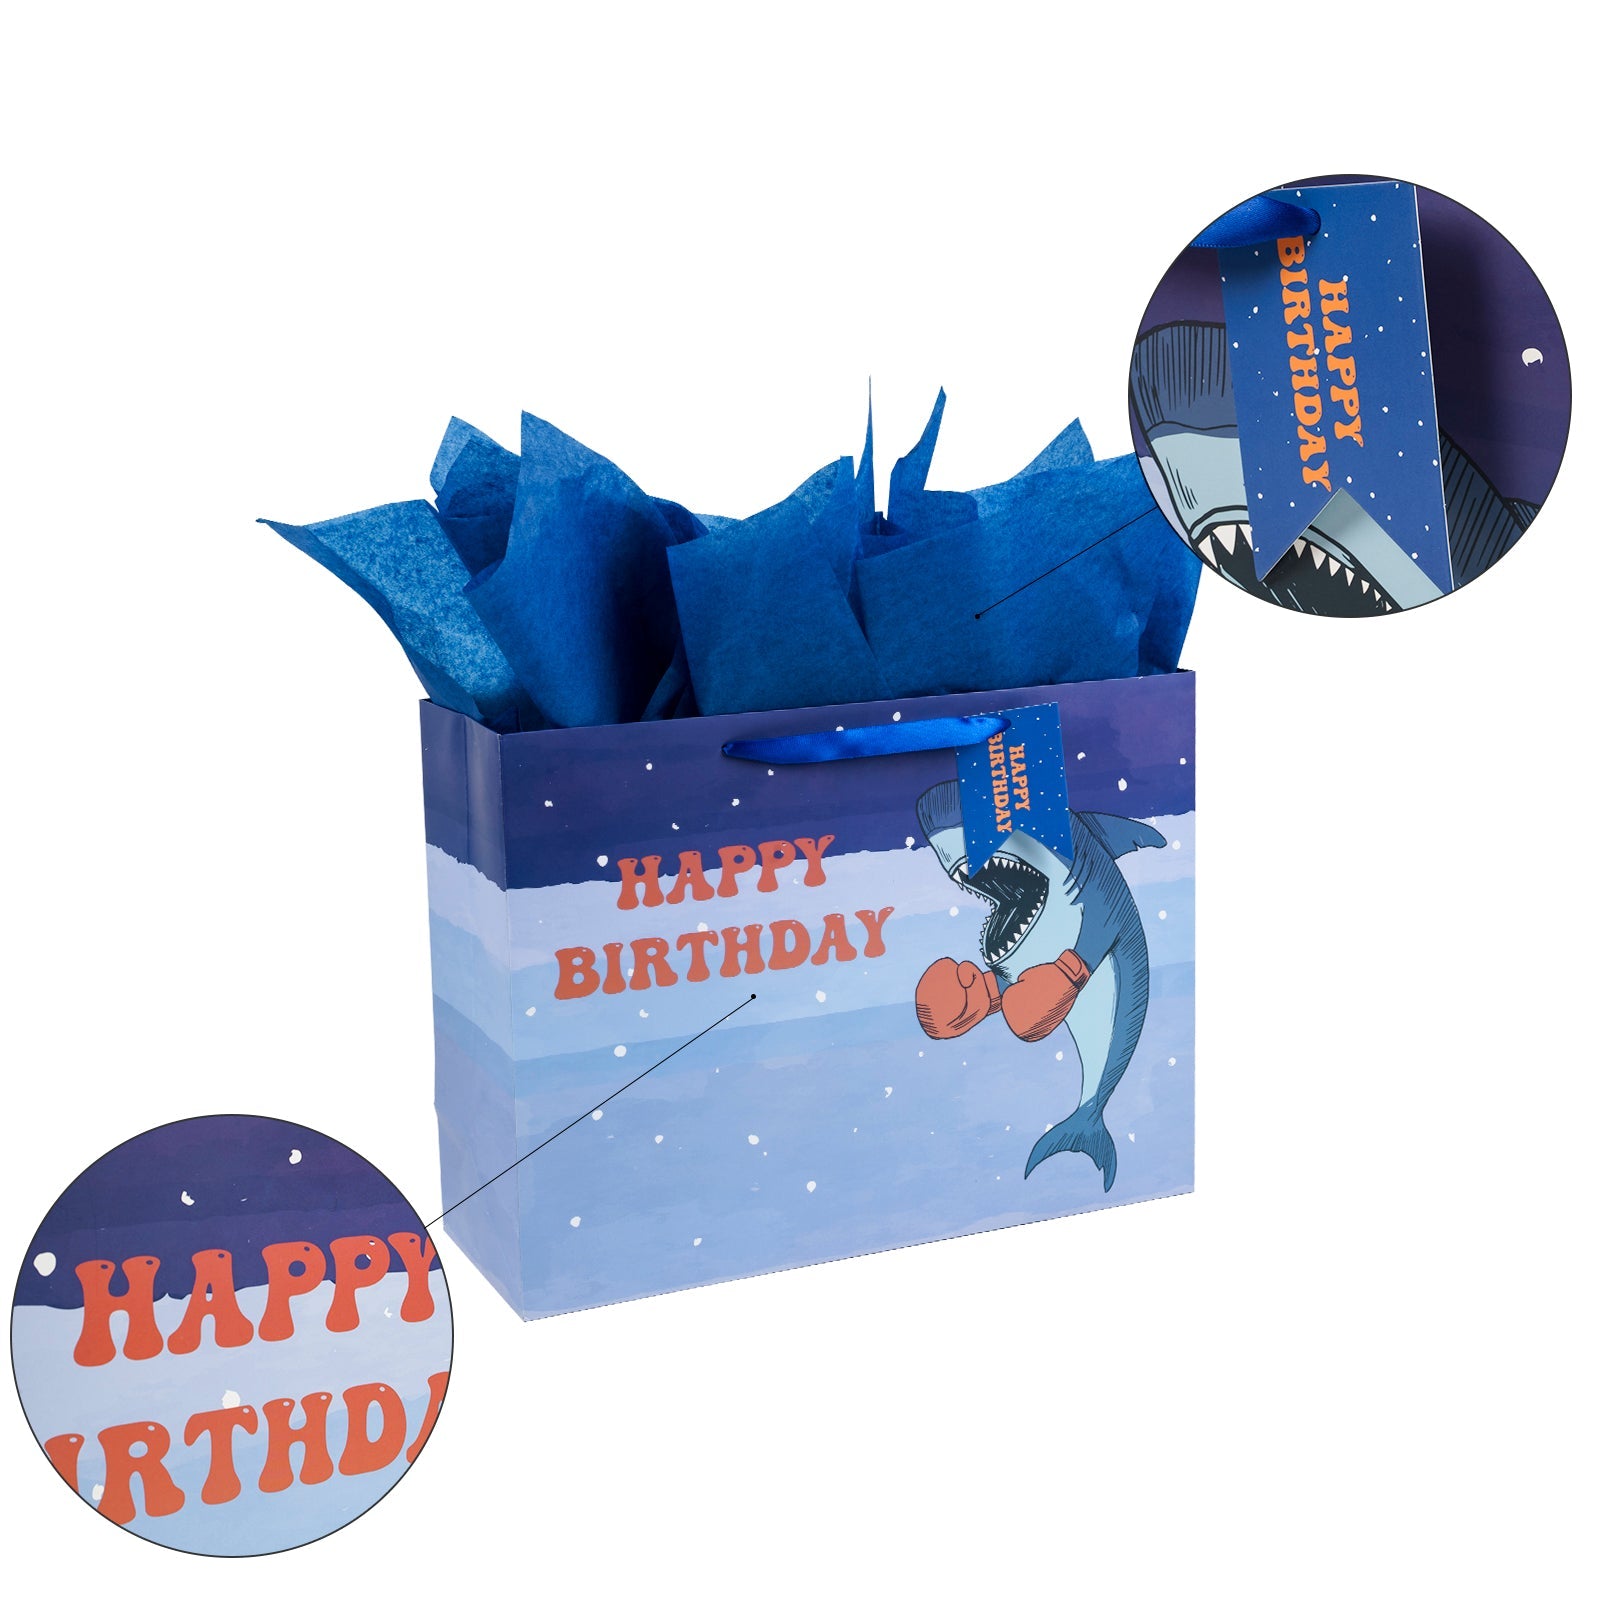 16 inch Extra Large Gift Bag with Birthday Card  & Tissue Paper for Boys - Shark Design